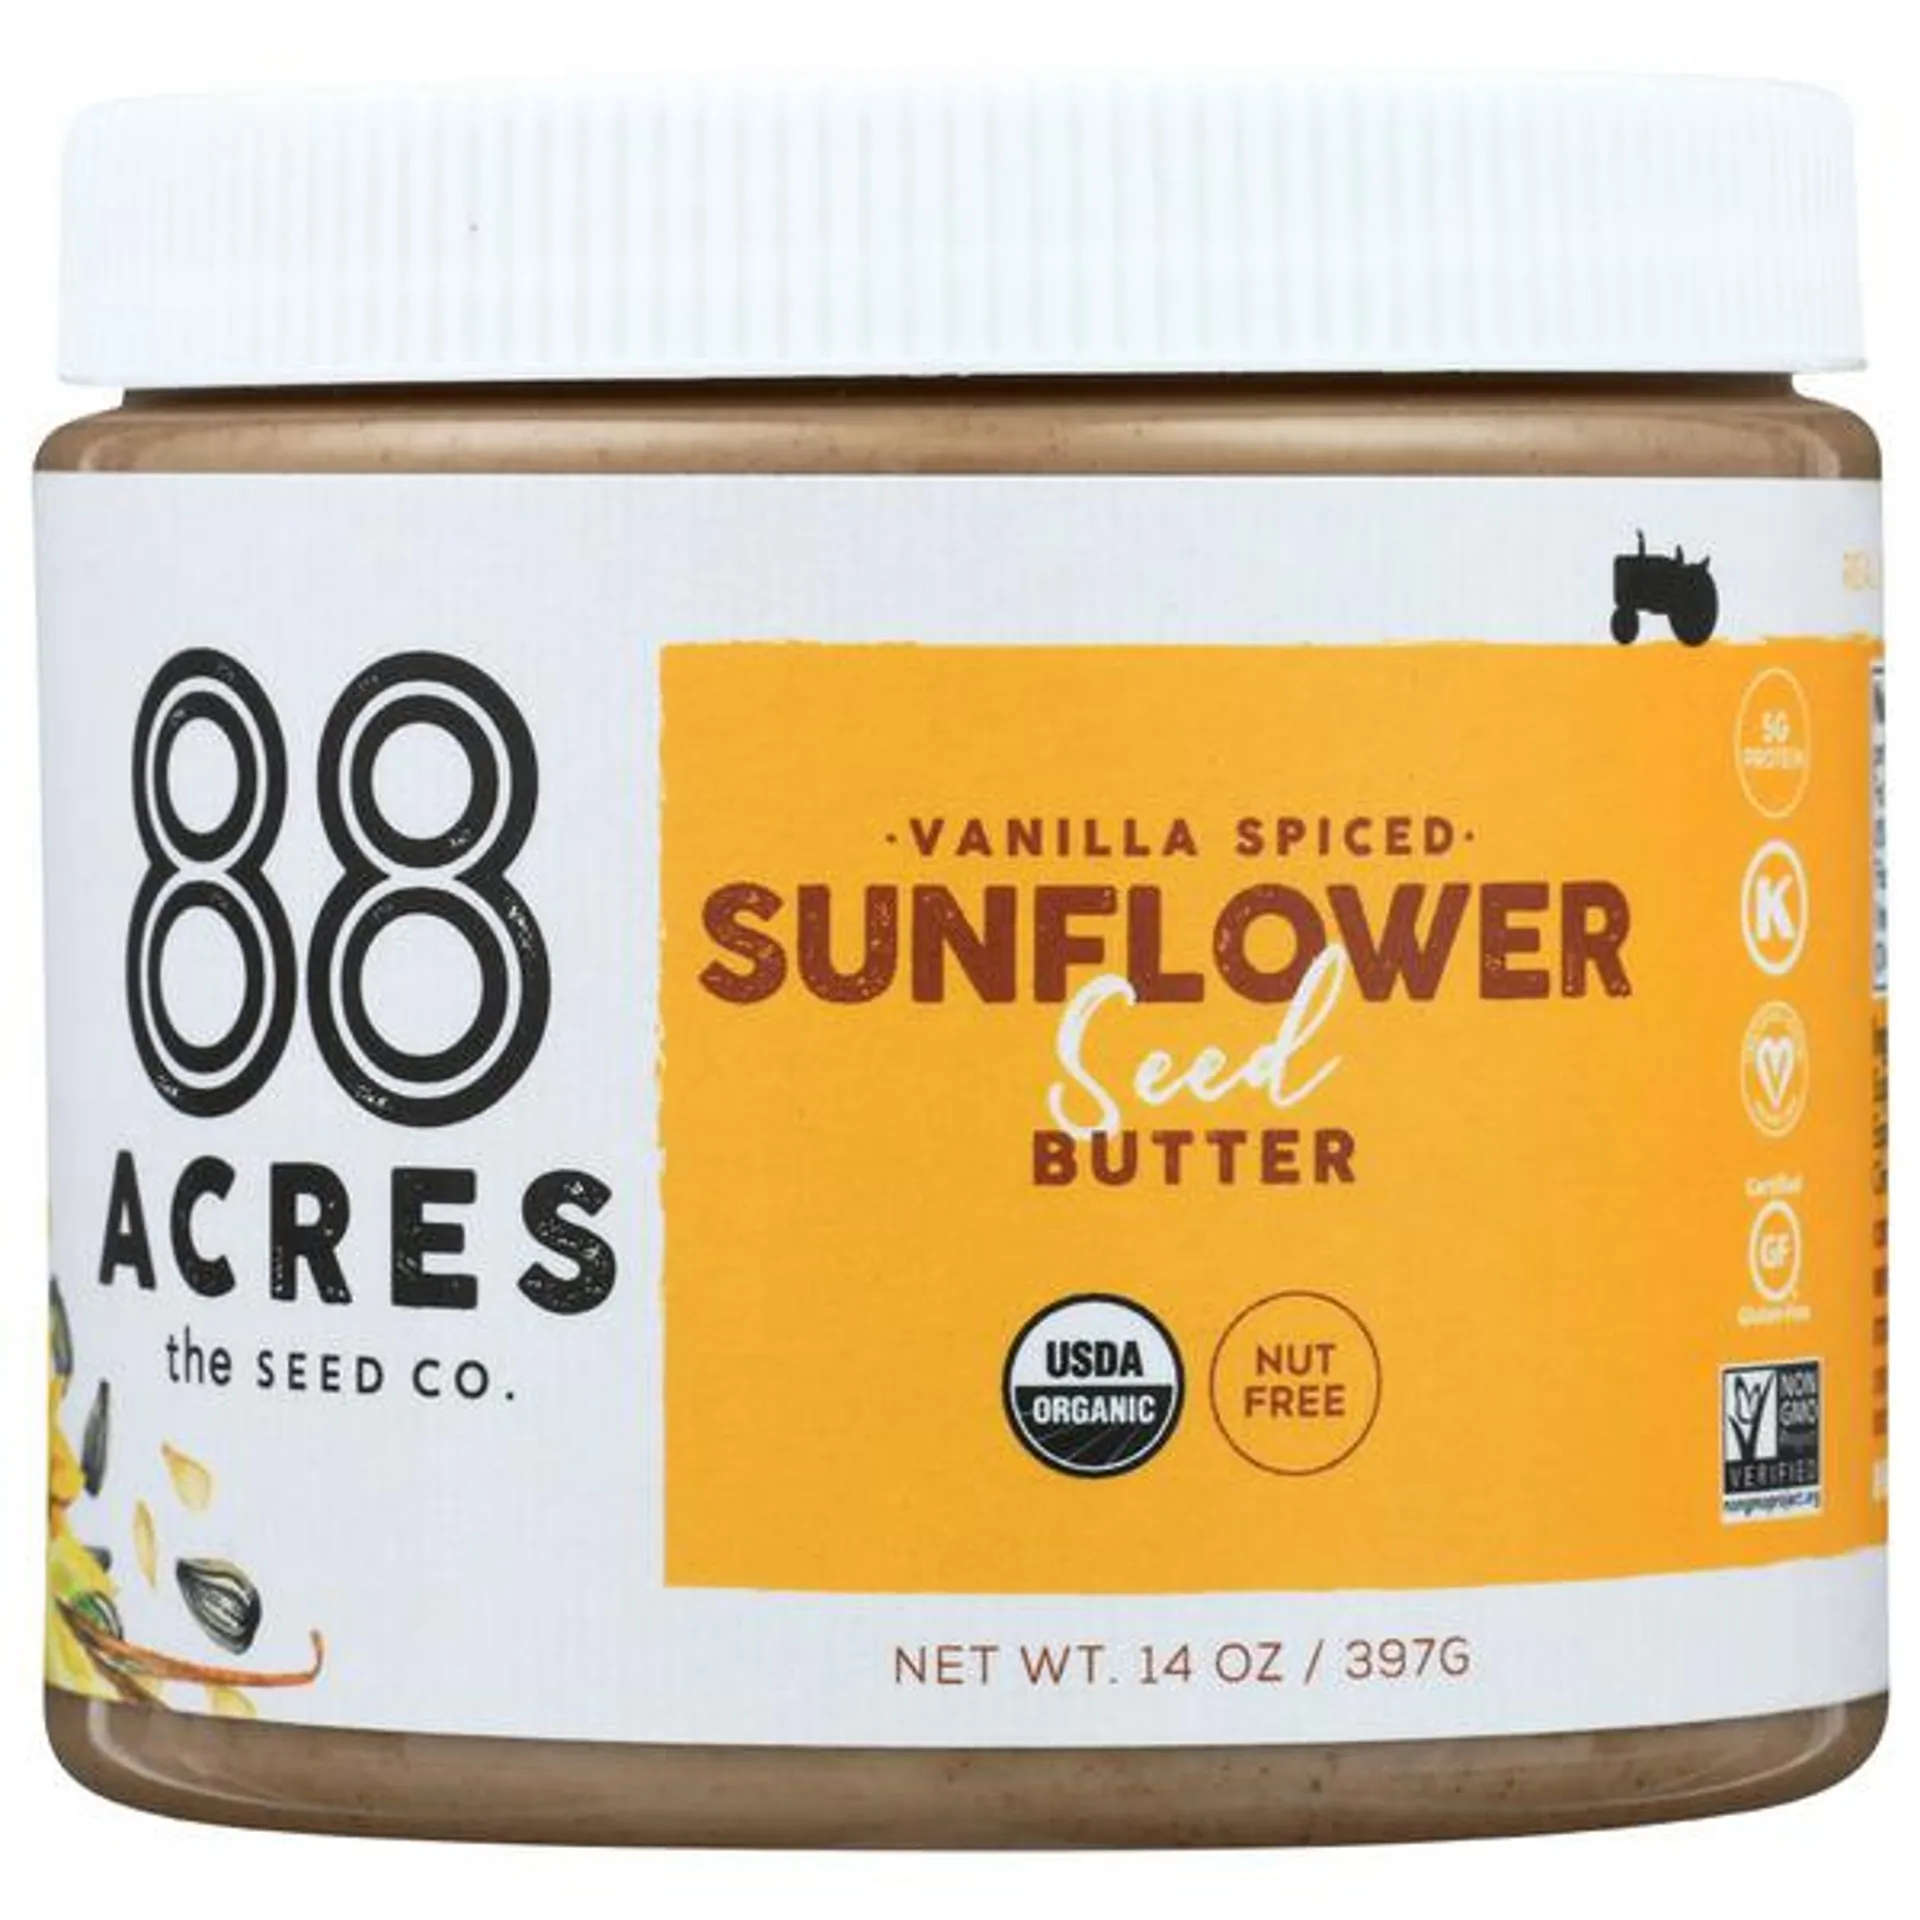 88 Acres Vanilla Spiced Sunflower Seed Butter - 14 Ounce